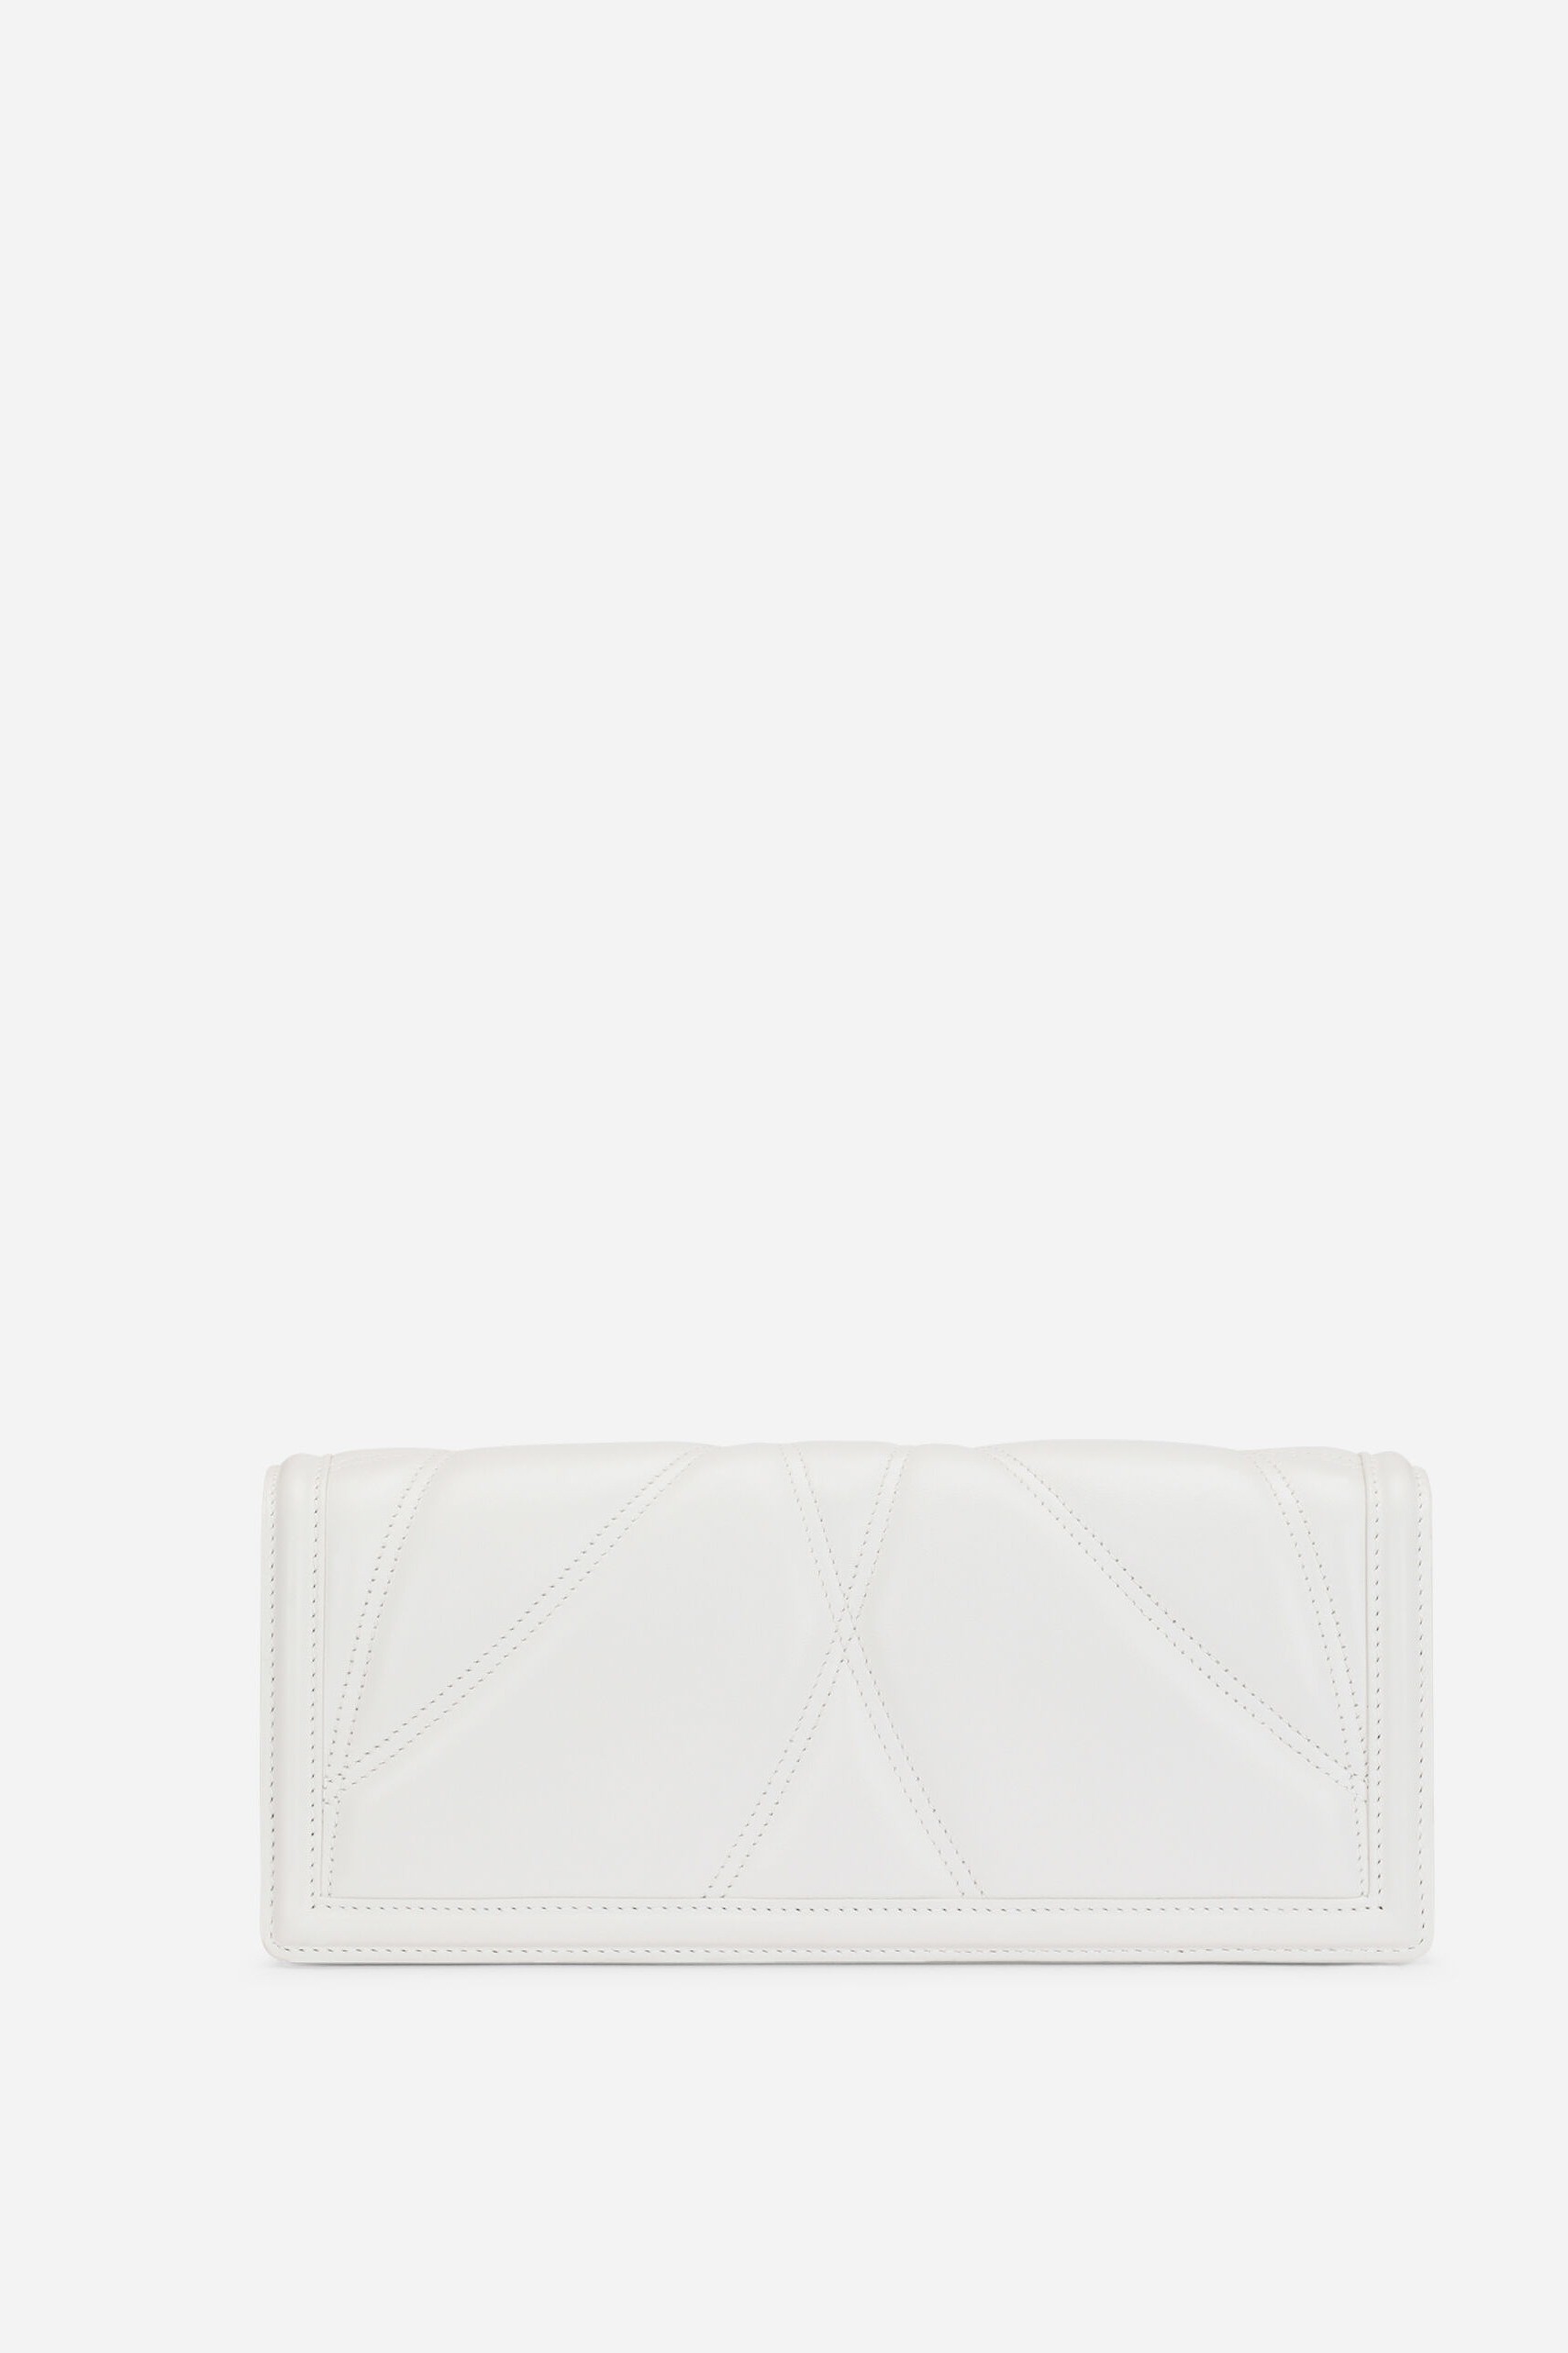 QUILTED NAPPA LEATHER DEVOTION BAGUETTE BAG - White